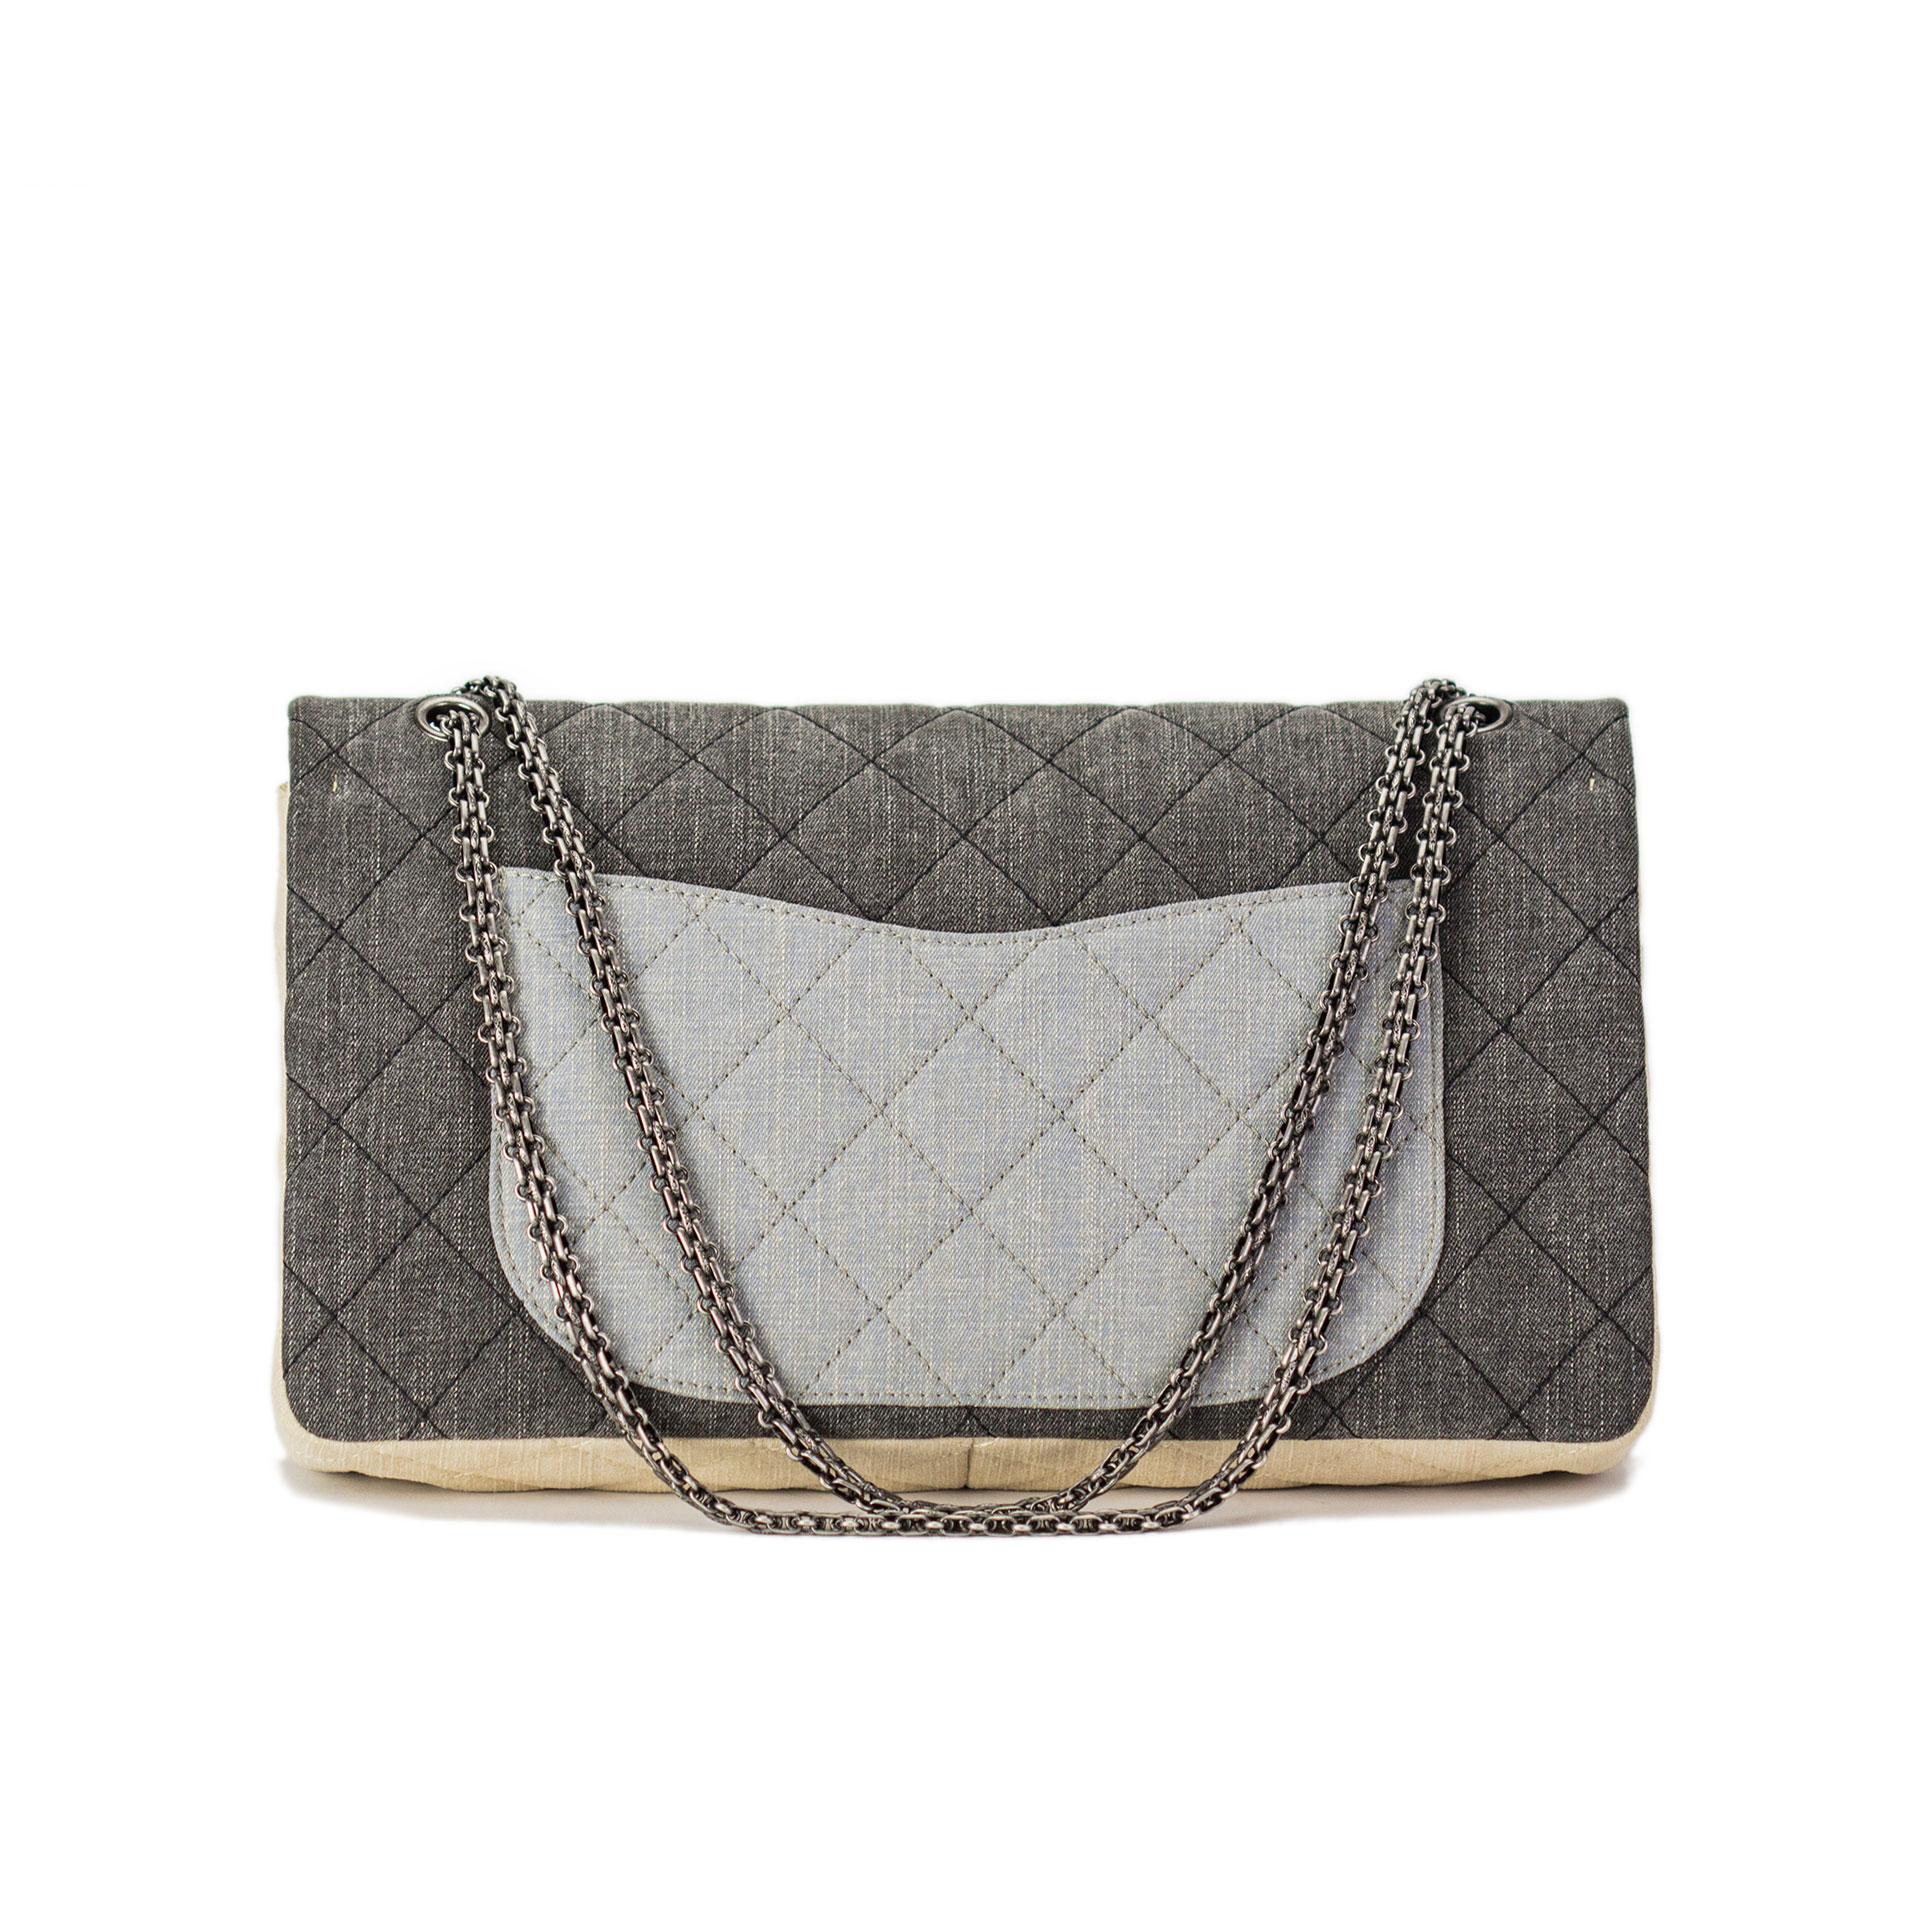 Chanel 2.55 Grey Reissue Canvas Denim Classic Double Flap Maxi Limited Edition  In Good Condition For Sale In Miami, FL